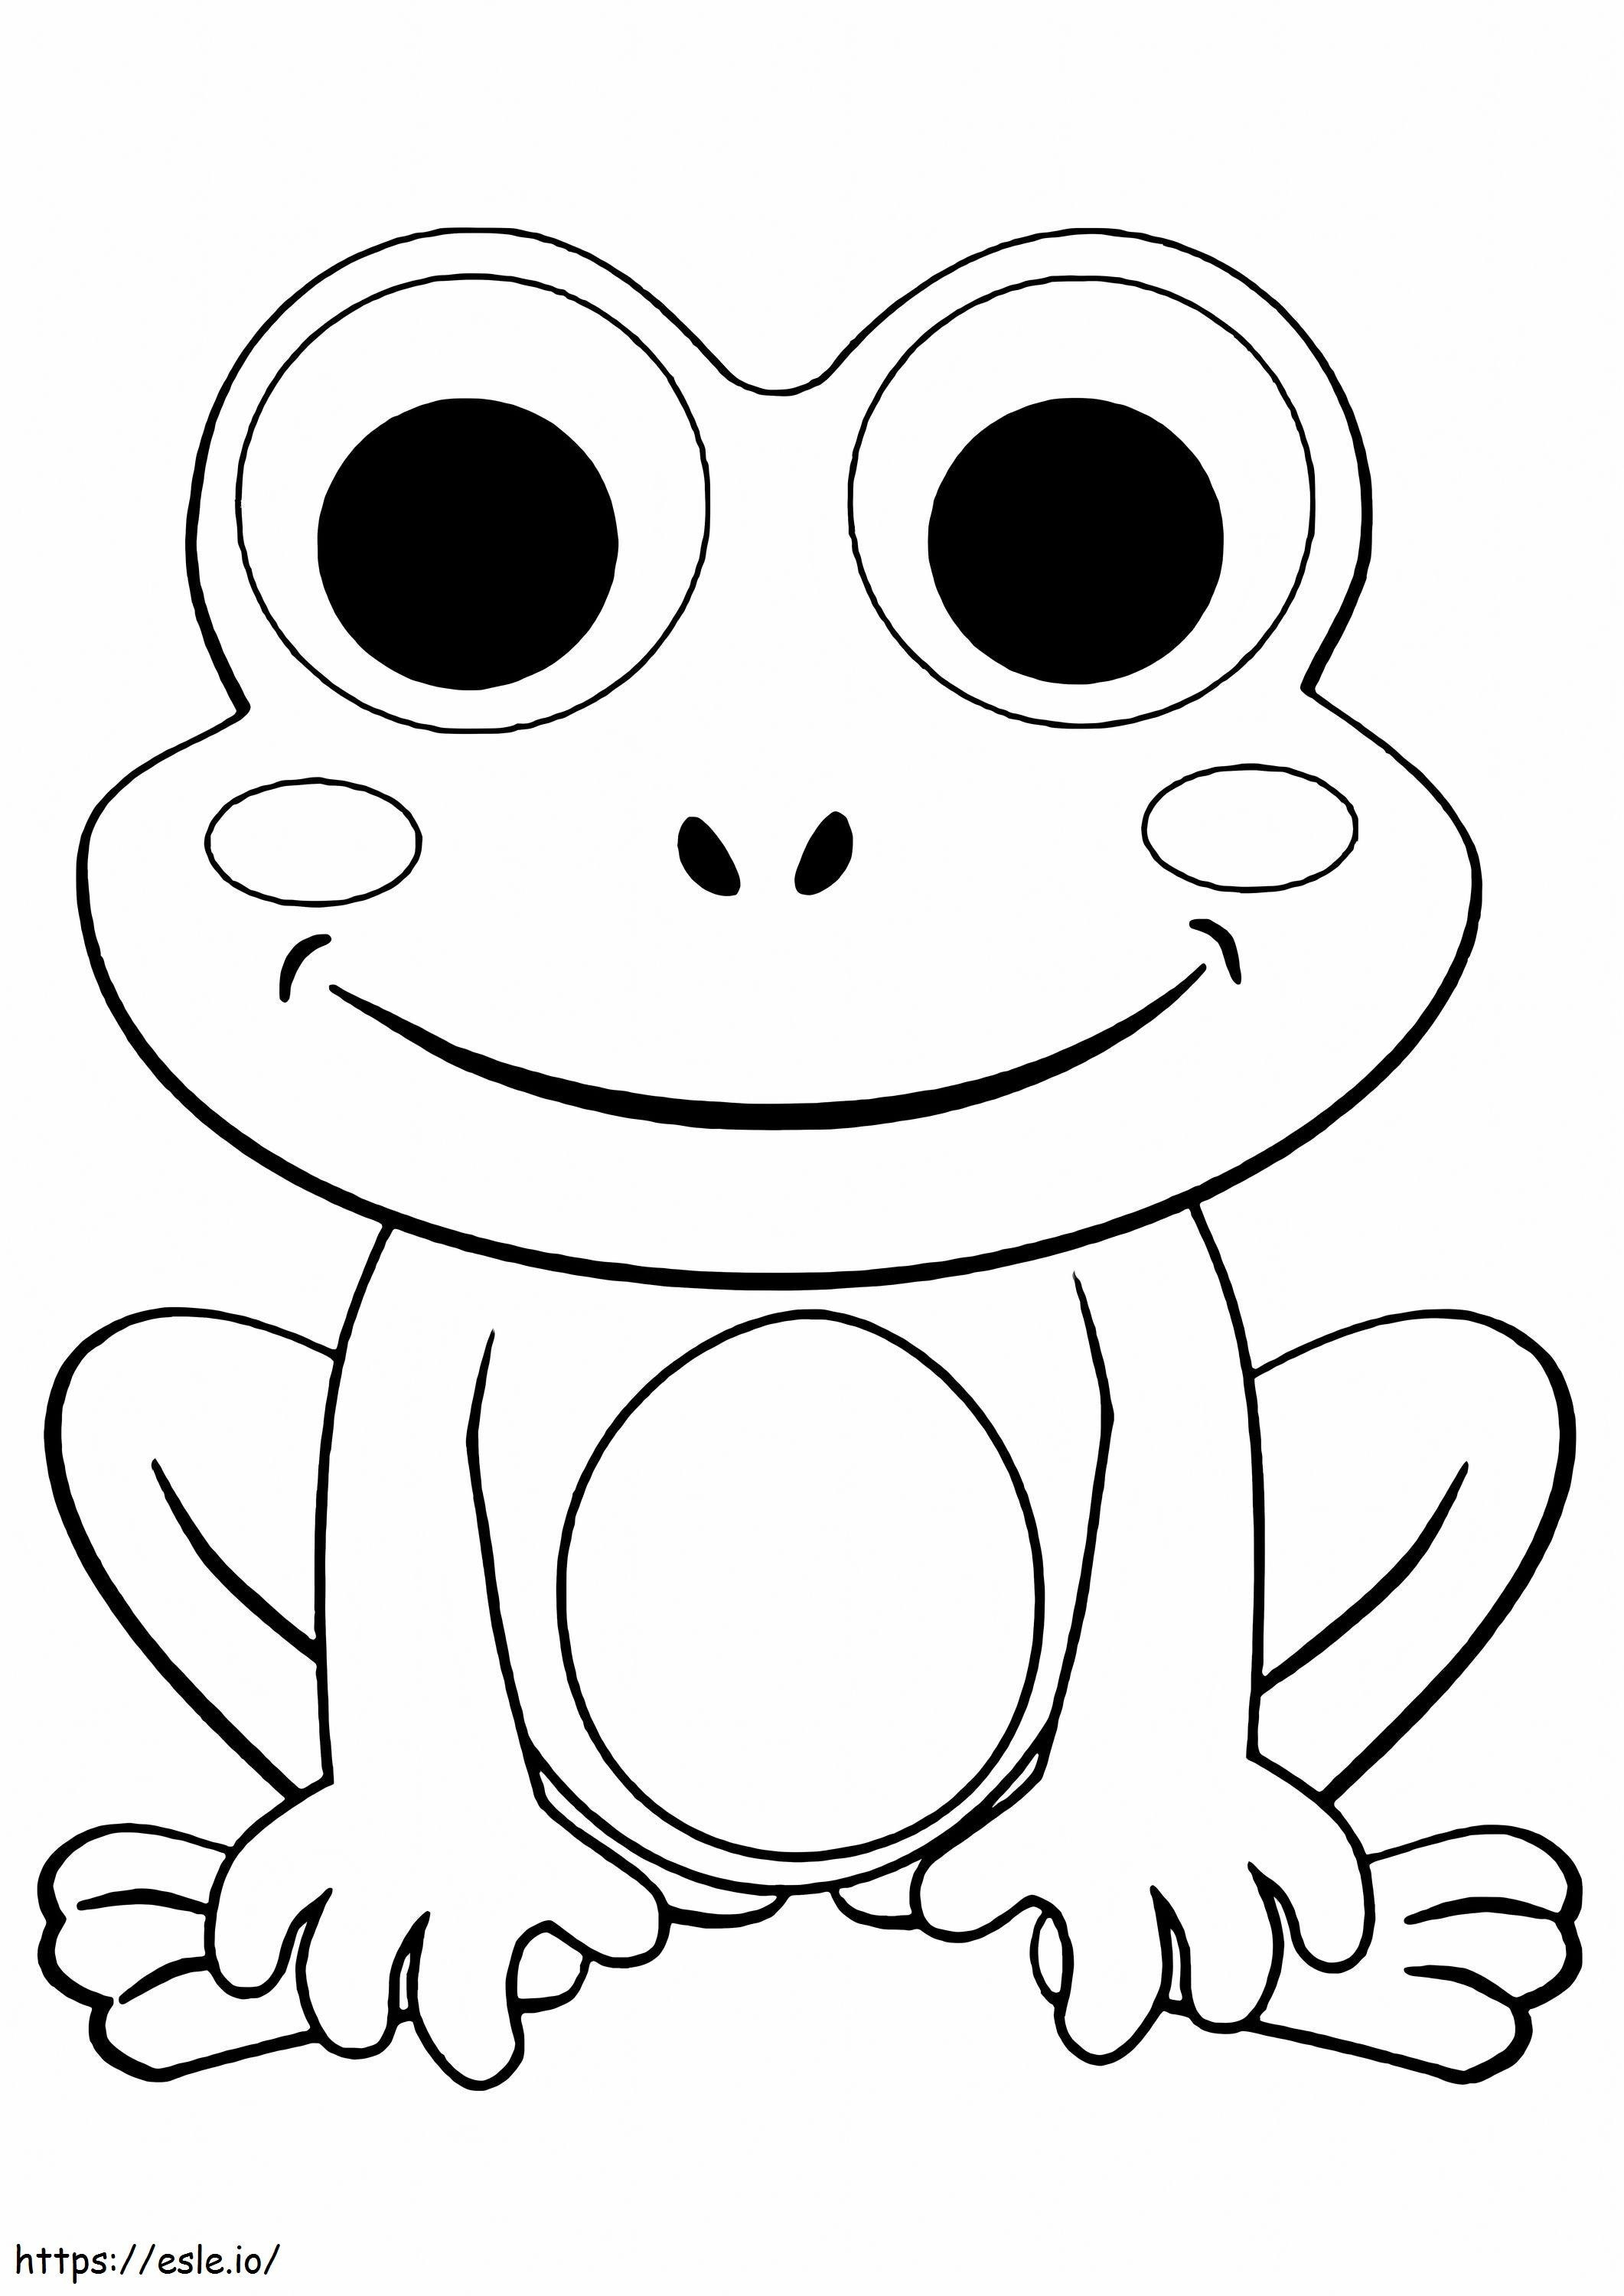 Basic Frog coloring page